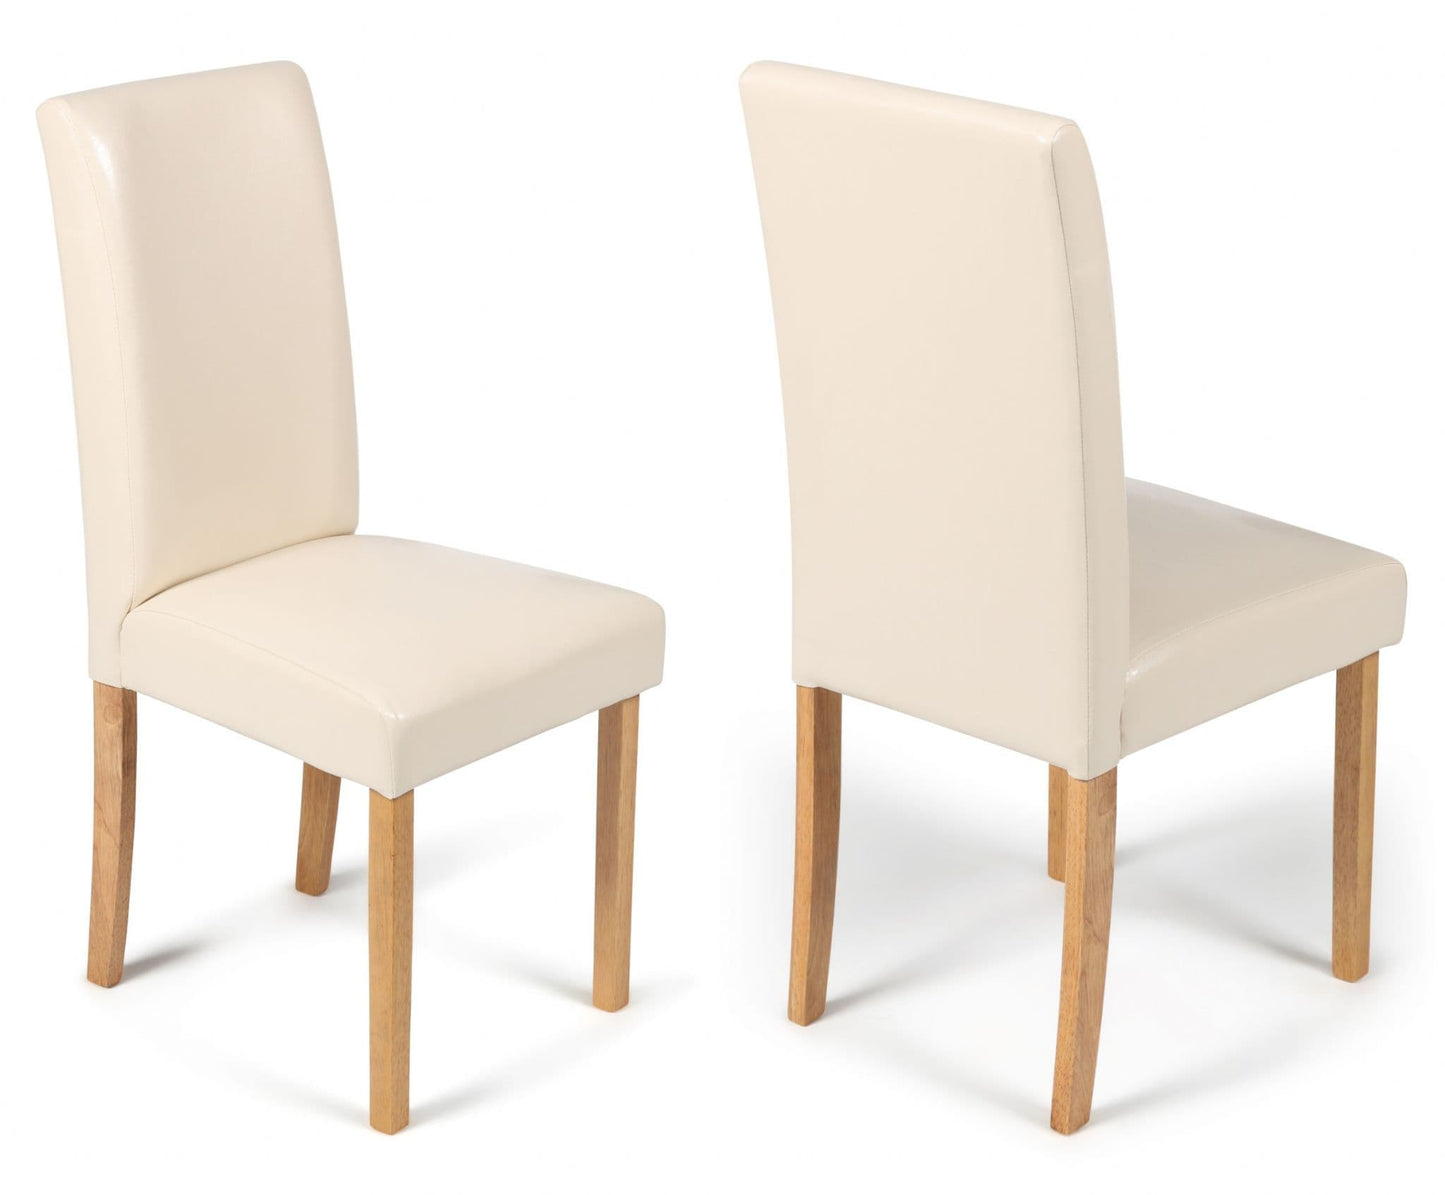 2 Cream Torino Faux Leather Dining Chairs